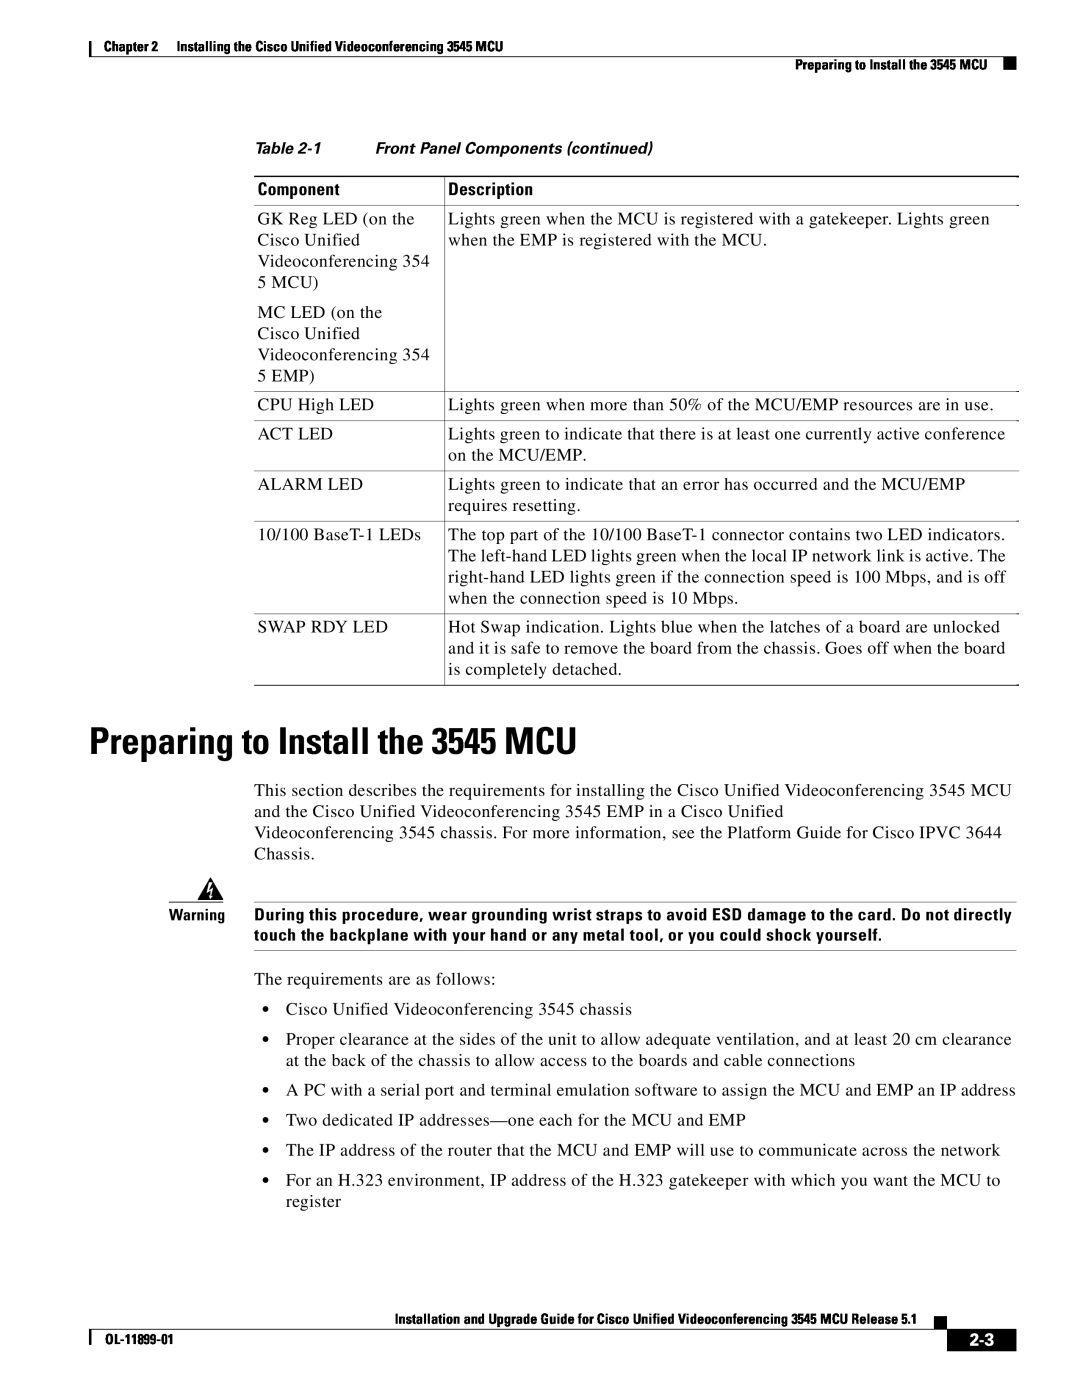 Cisco Systems manual Preparing to Install the 3545 MCU, Description, Front Panel Components continued 